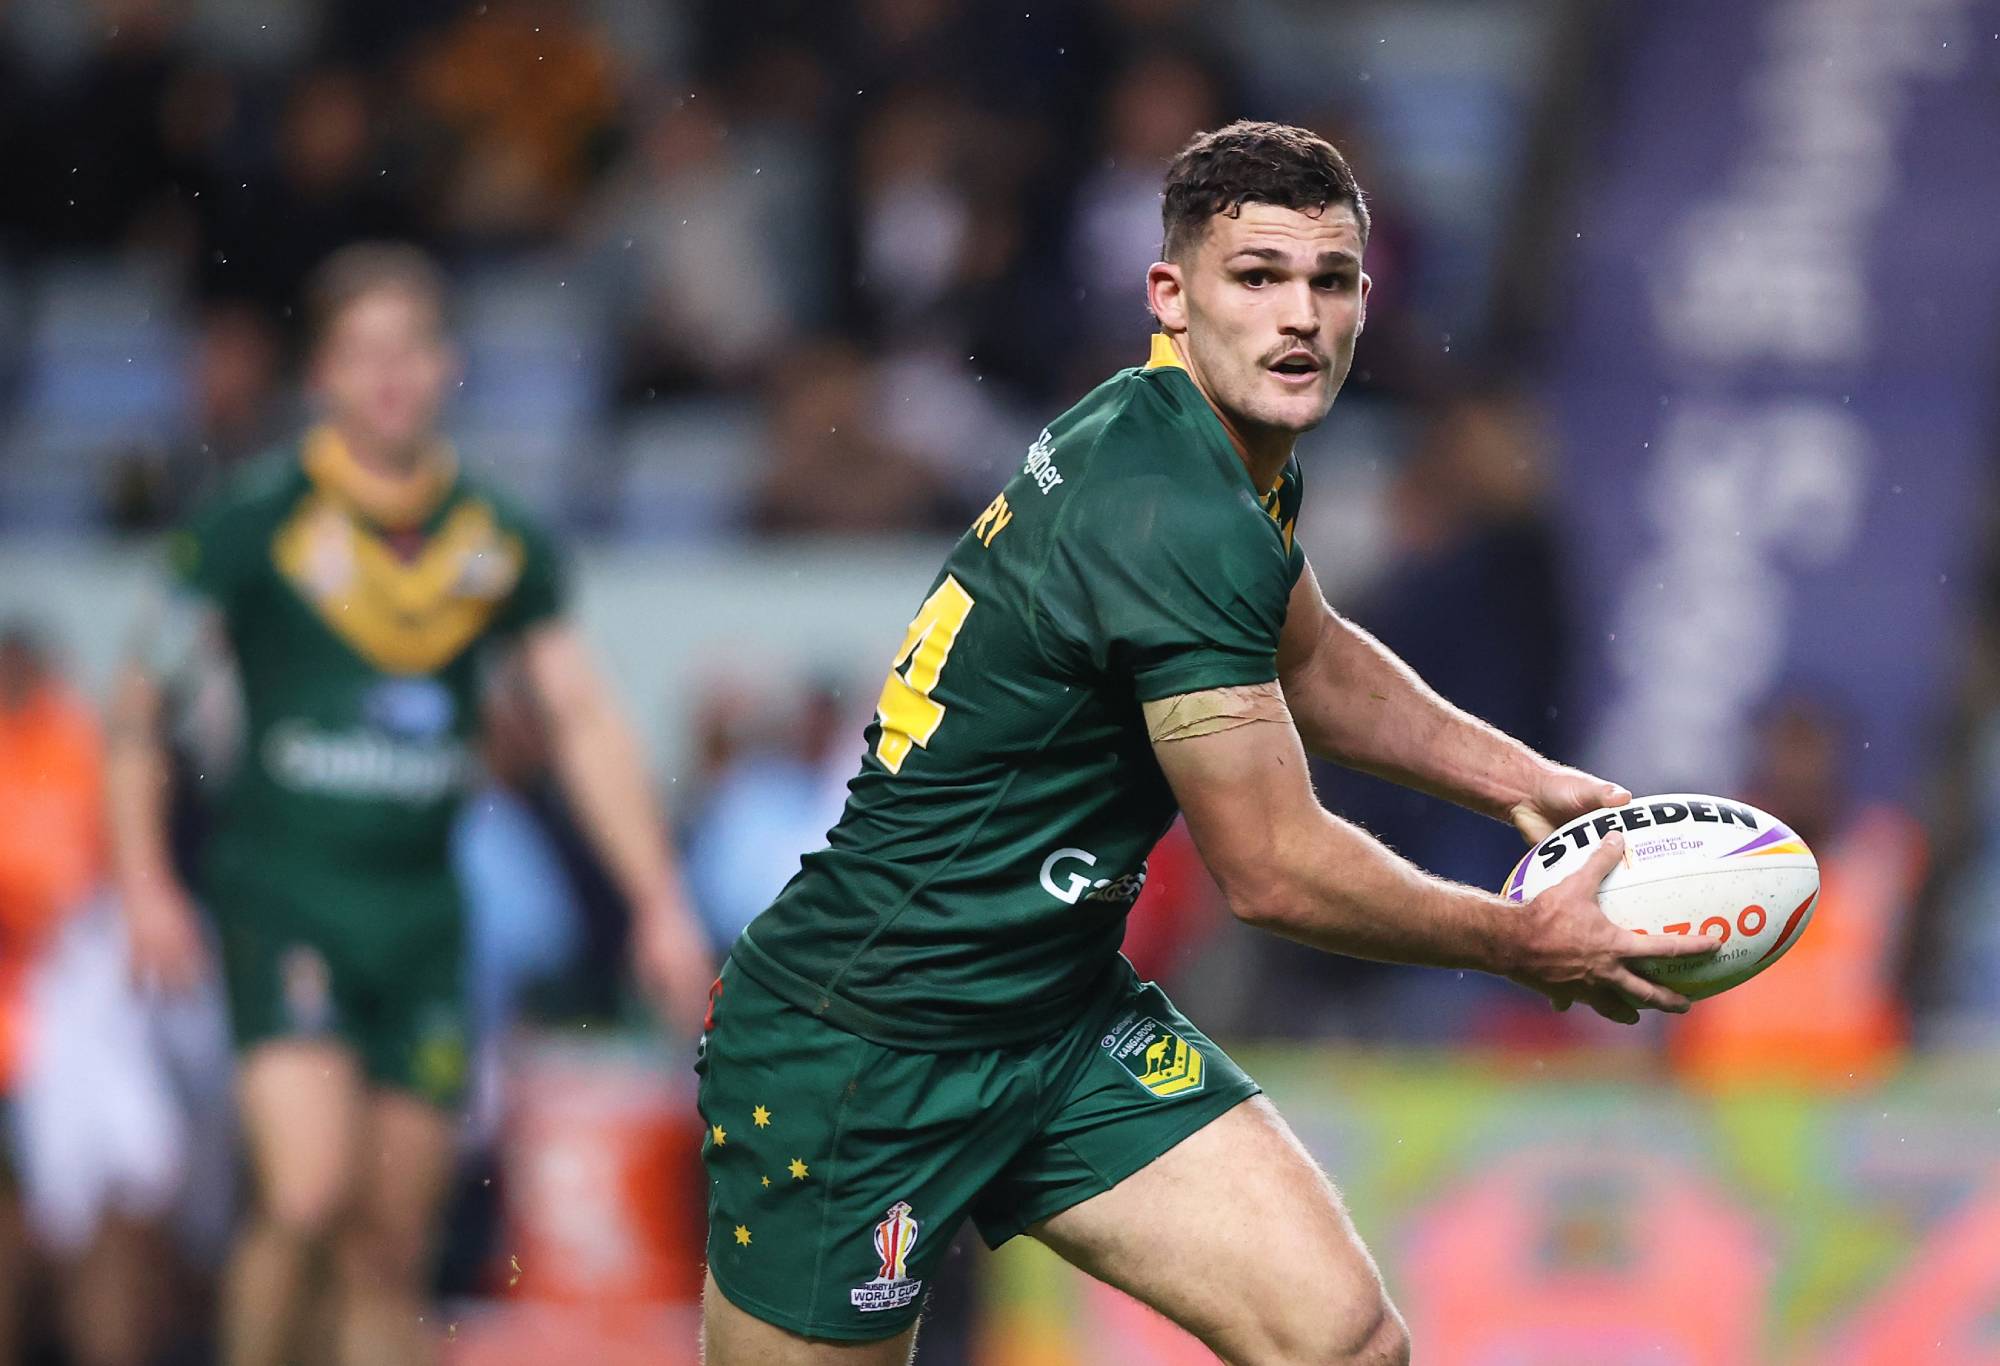 COVENTRY, ENGLAND - OCTOBER 21: Nathan Cleary of Australia runs with the ball during the Rugby League World Cup 2021 Pool B match between Australia and Scotland at The Coventry Building Society Arena on October 21, 2022 in Coventry, England. (Photo by Naomi Baker/Getty Images)